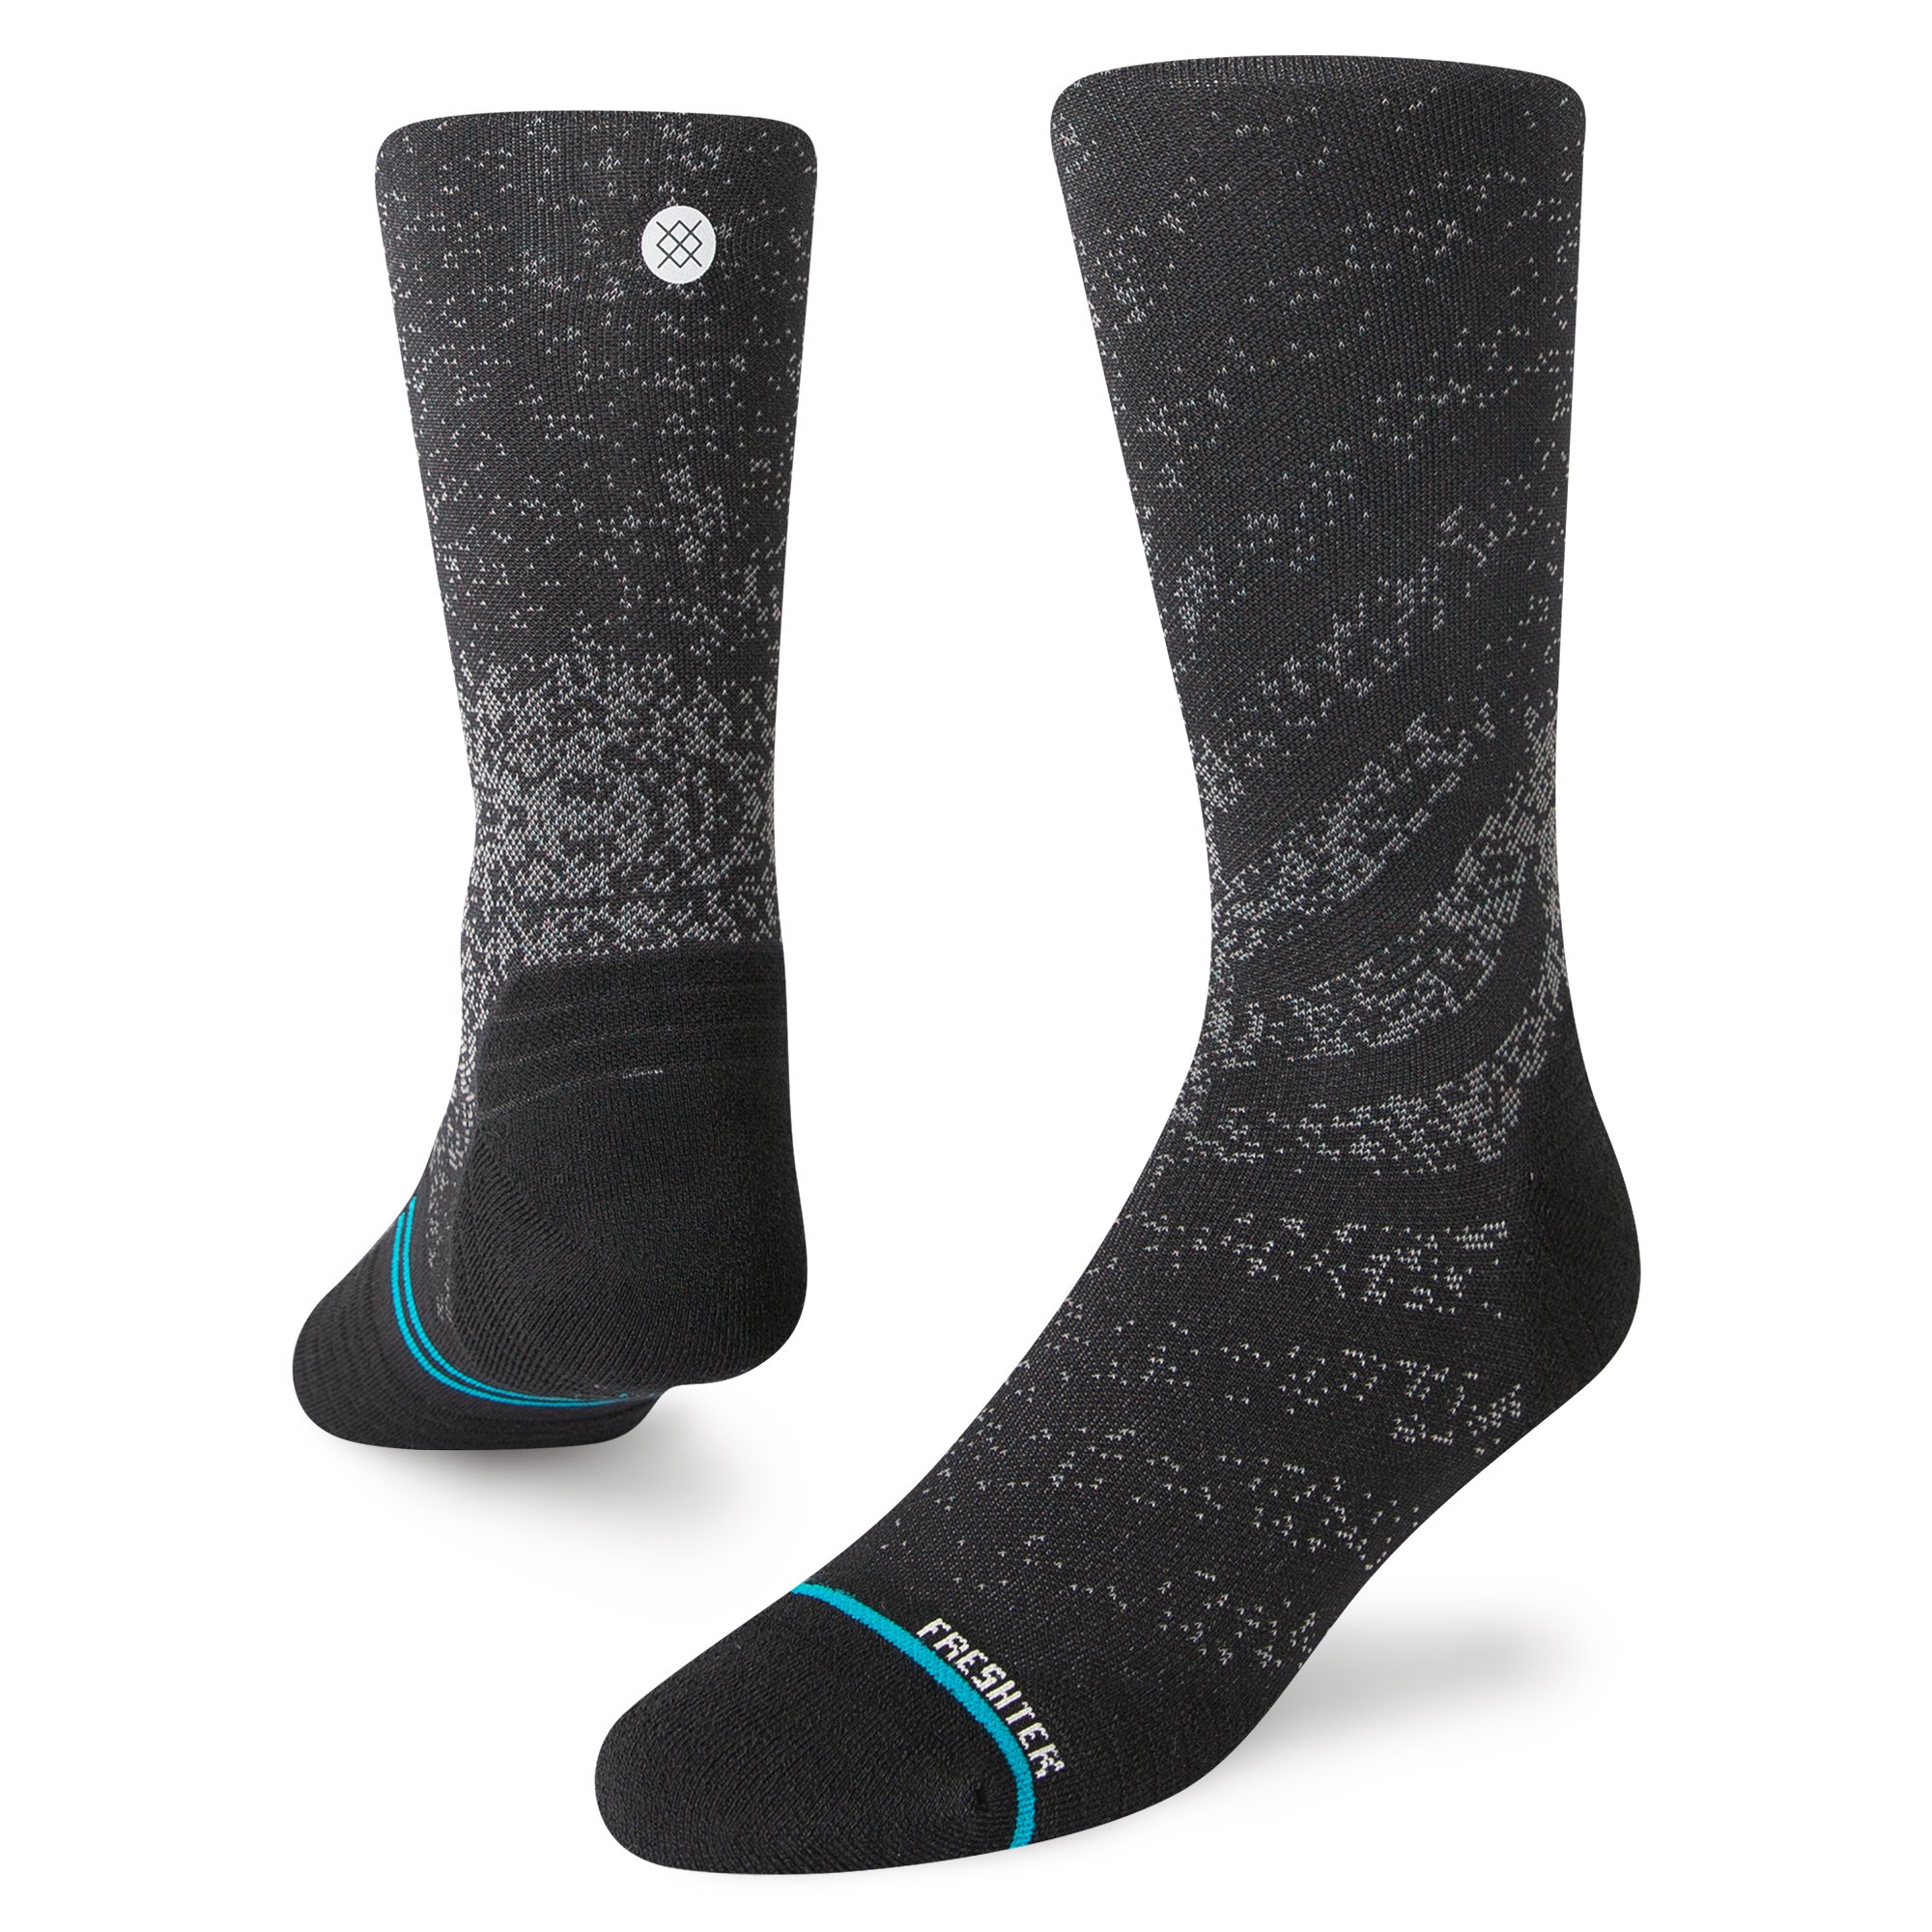 Whole Earth Provision Co.  STANCE Stance Unisex Butter Blend Crew Socks